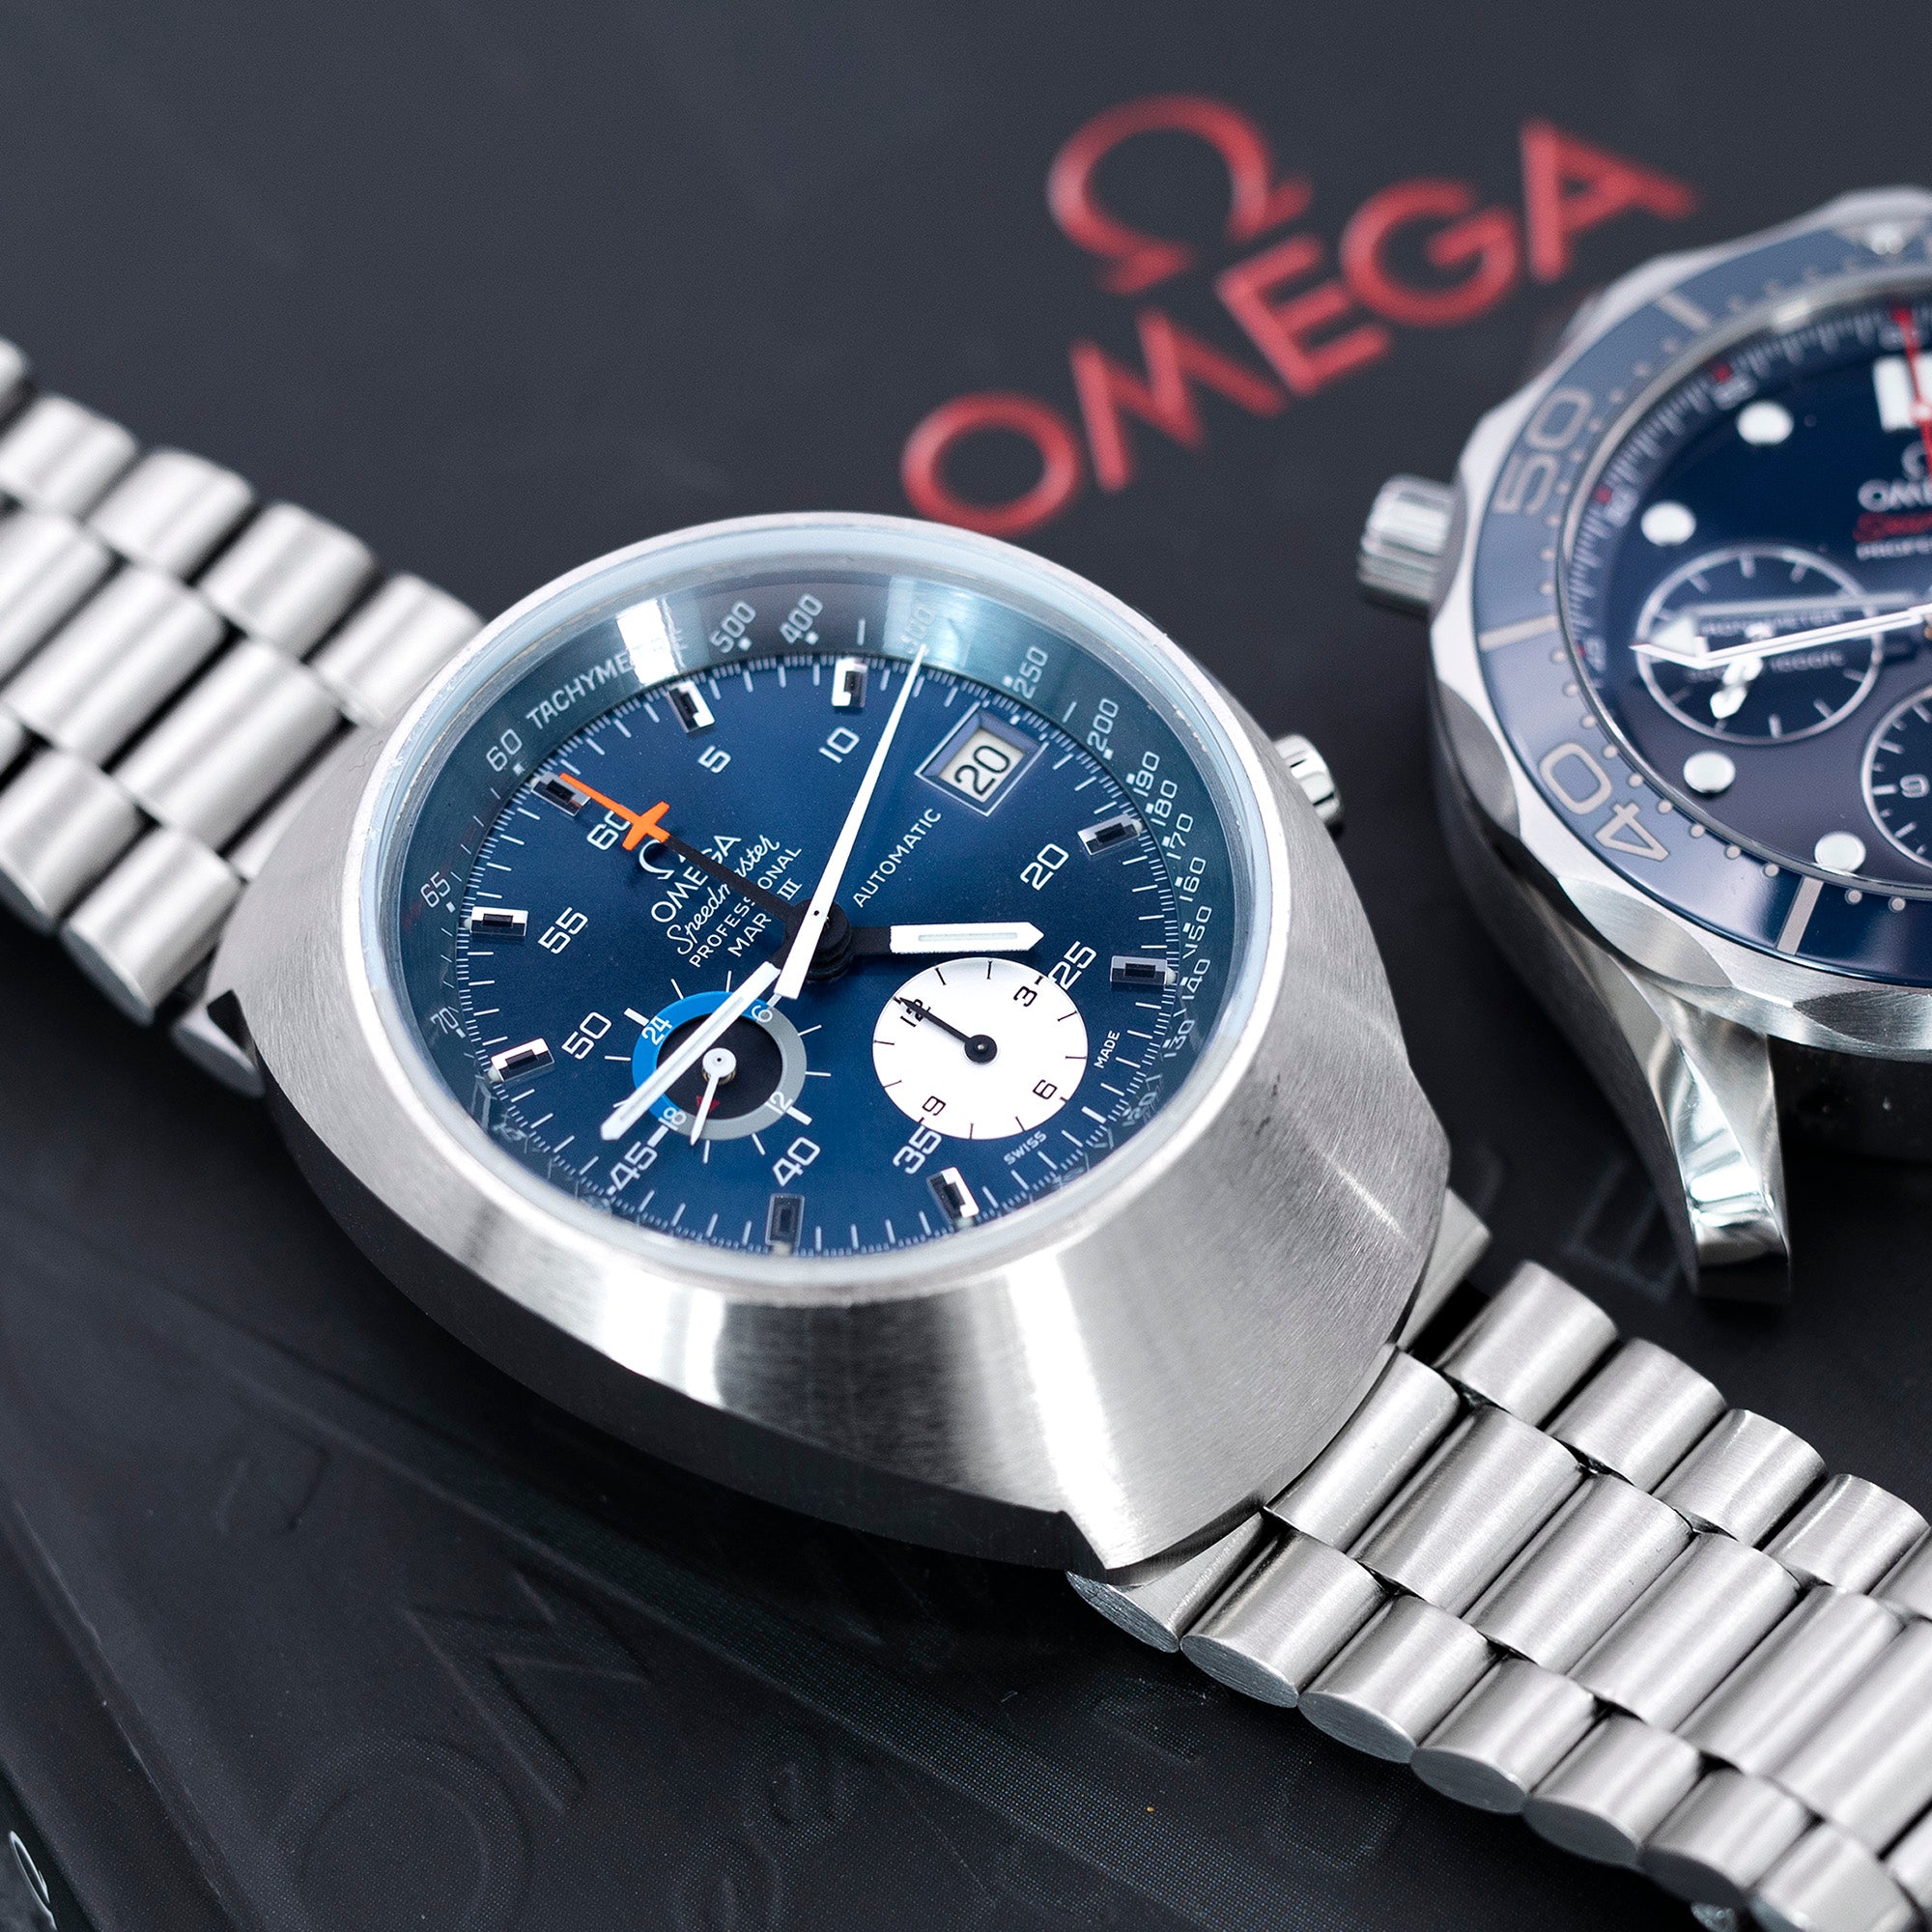 The Best Watches Each Swatch Group Brand Makes! (Omega, Rado